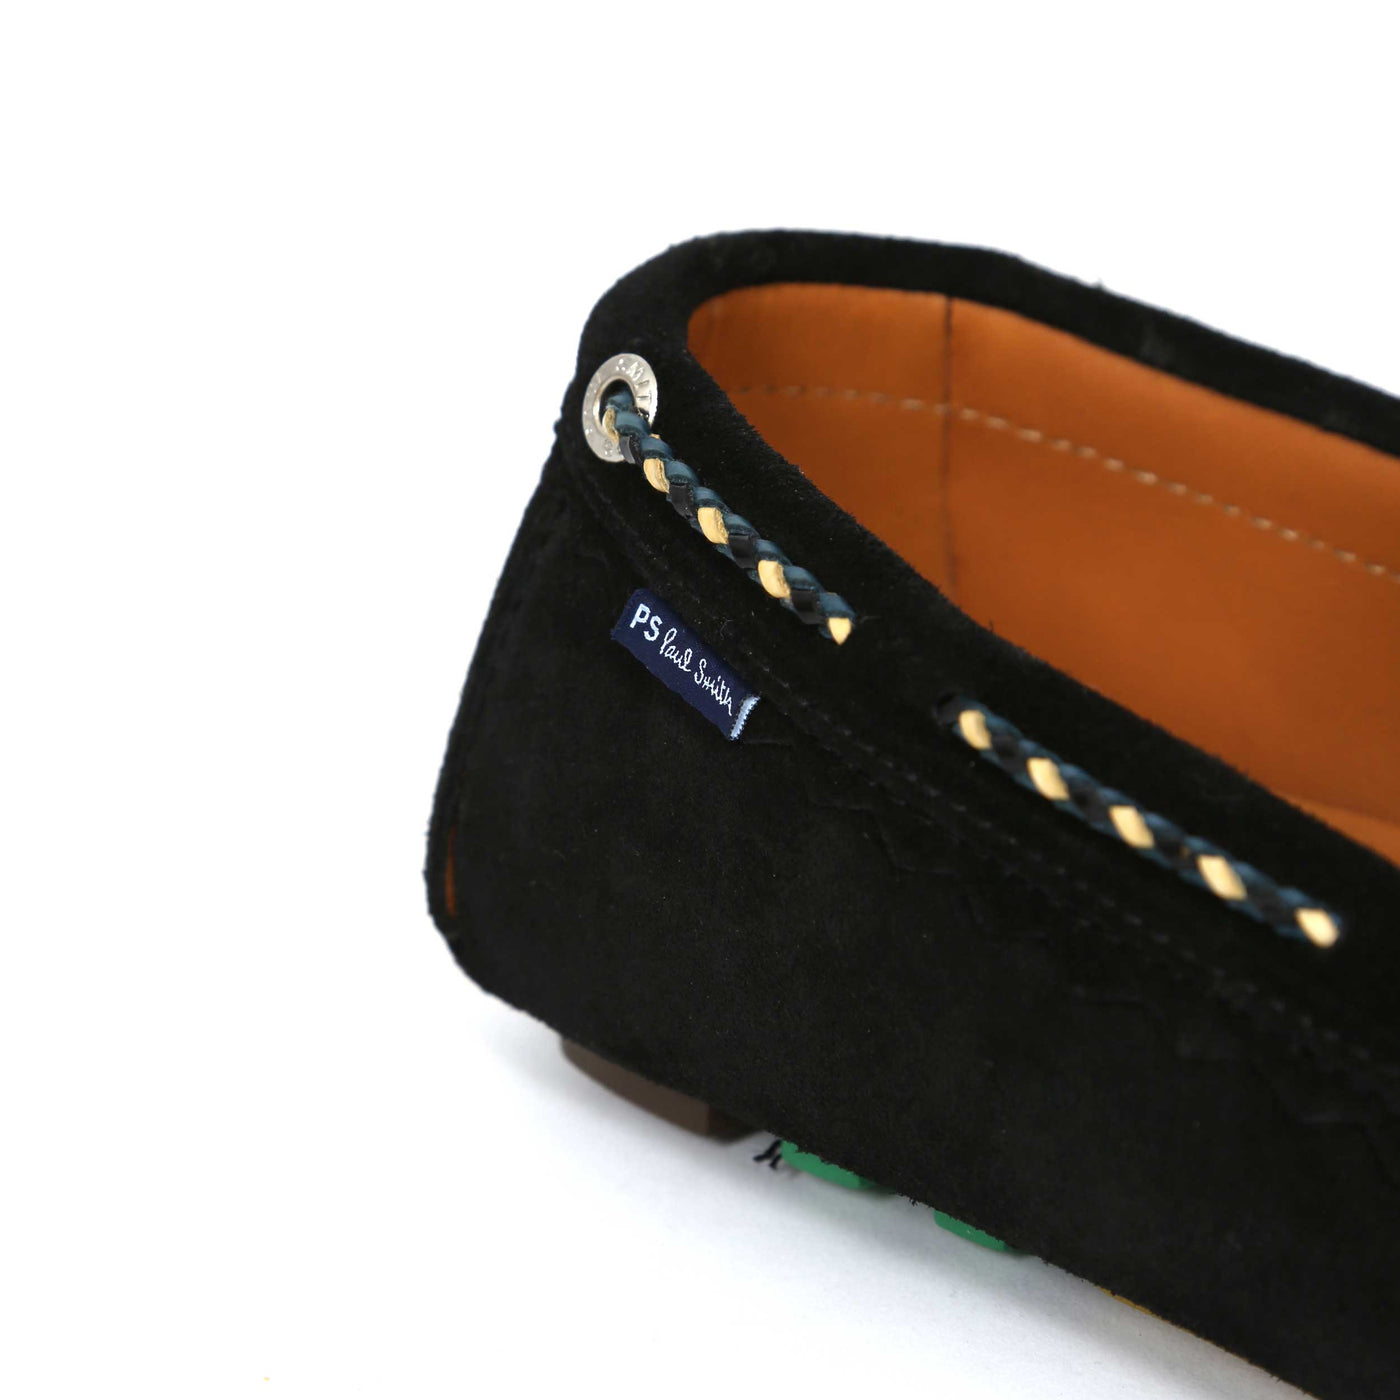 Paul Smith Springfield Loafer in Black Suede Details